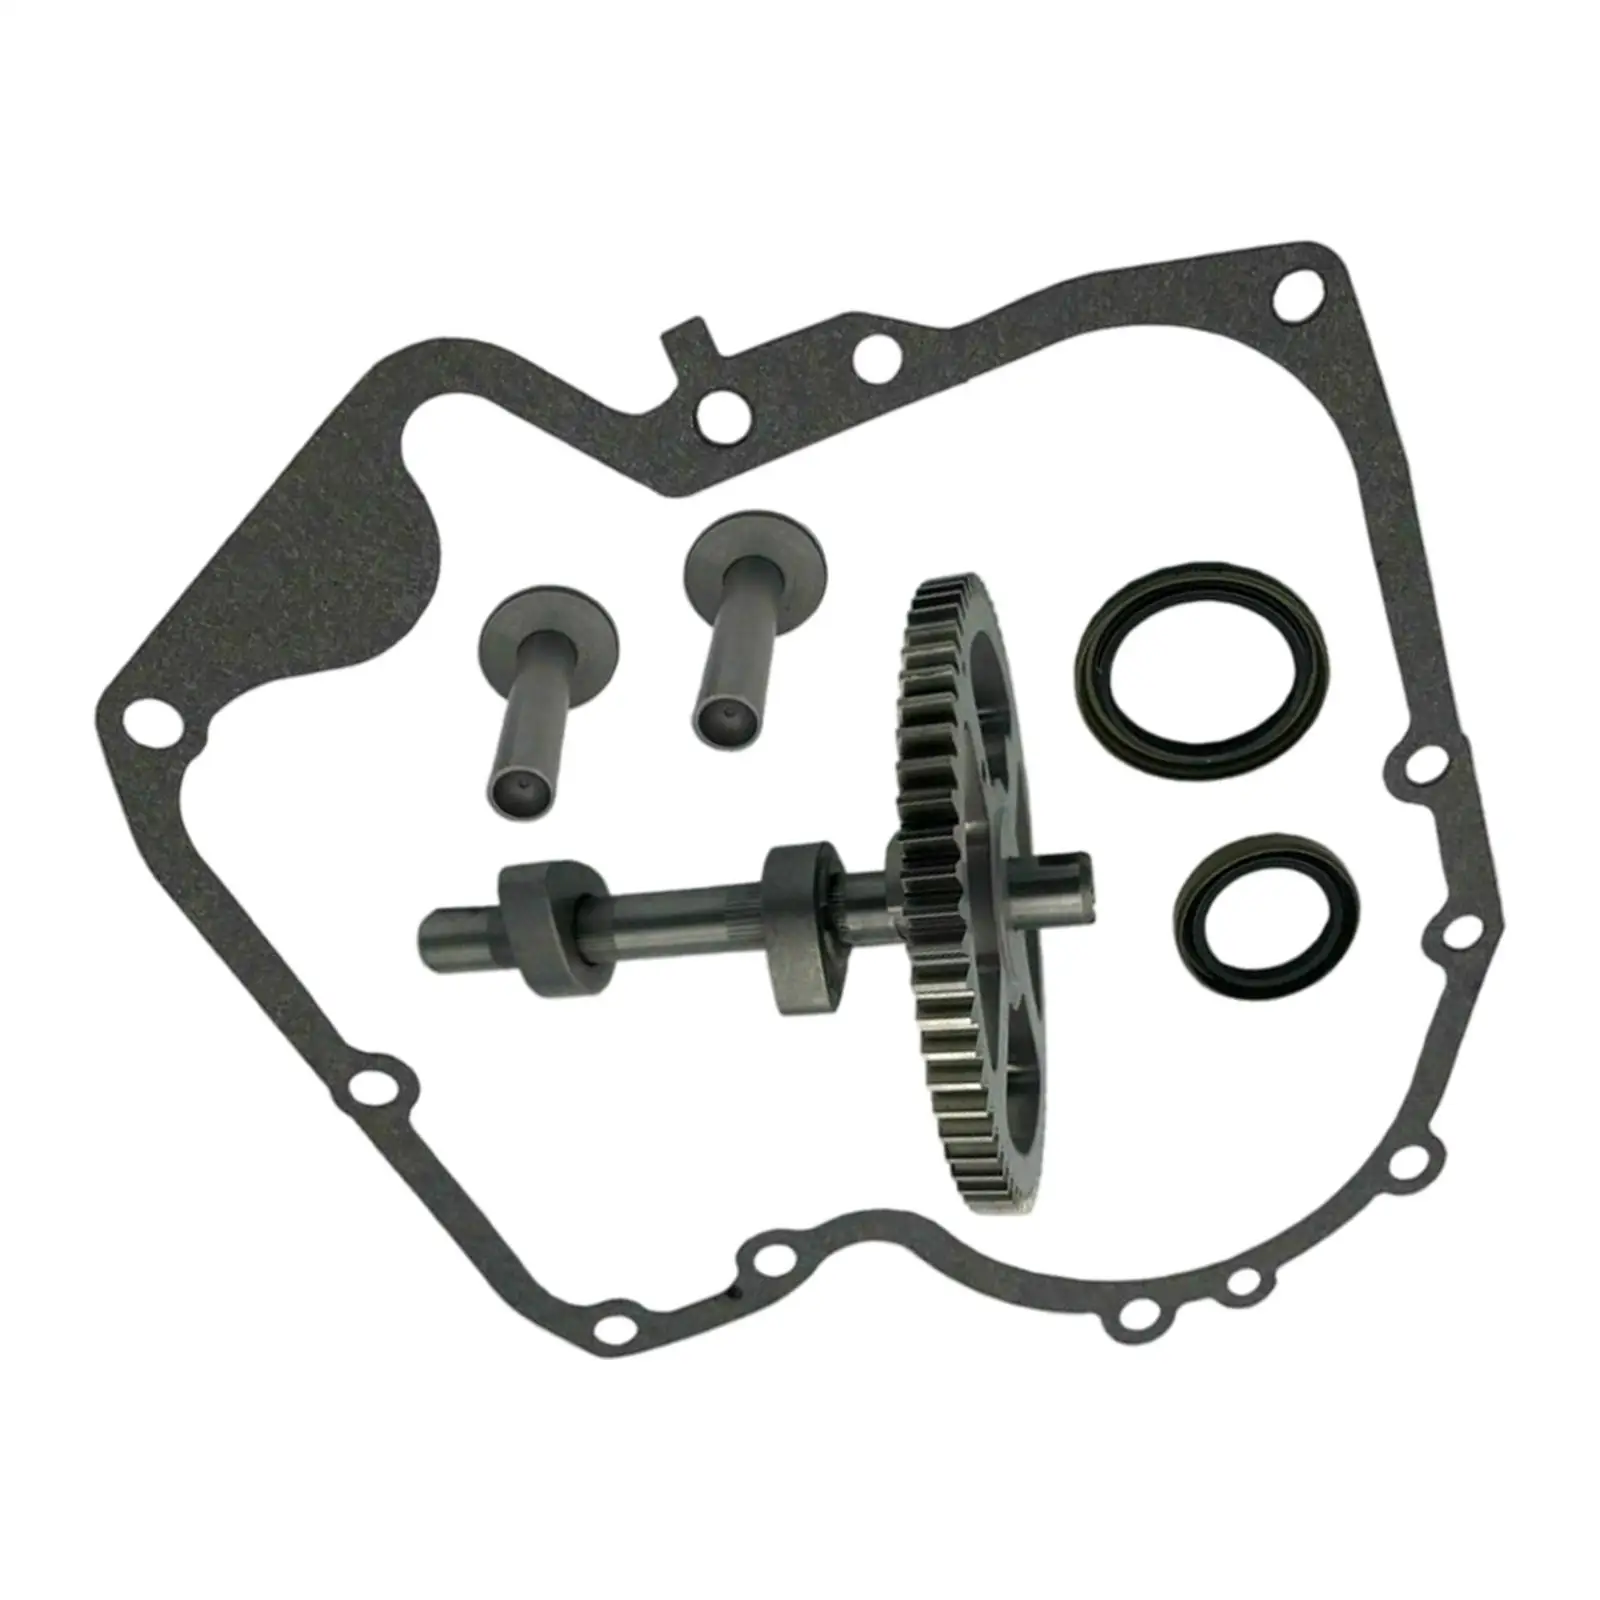 793880 Sump Camshaft Kit with 697110 Gasket Replacement for 793893583 792681 791942 795102 Oil  Connecting Rods